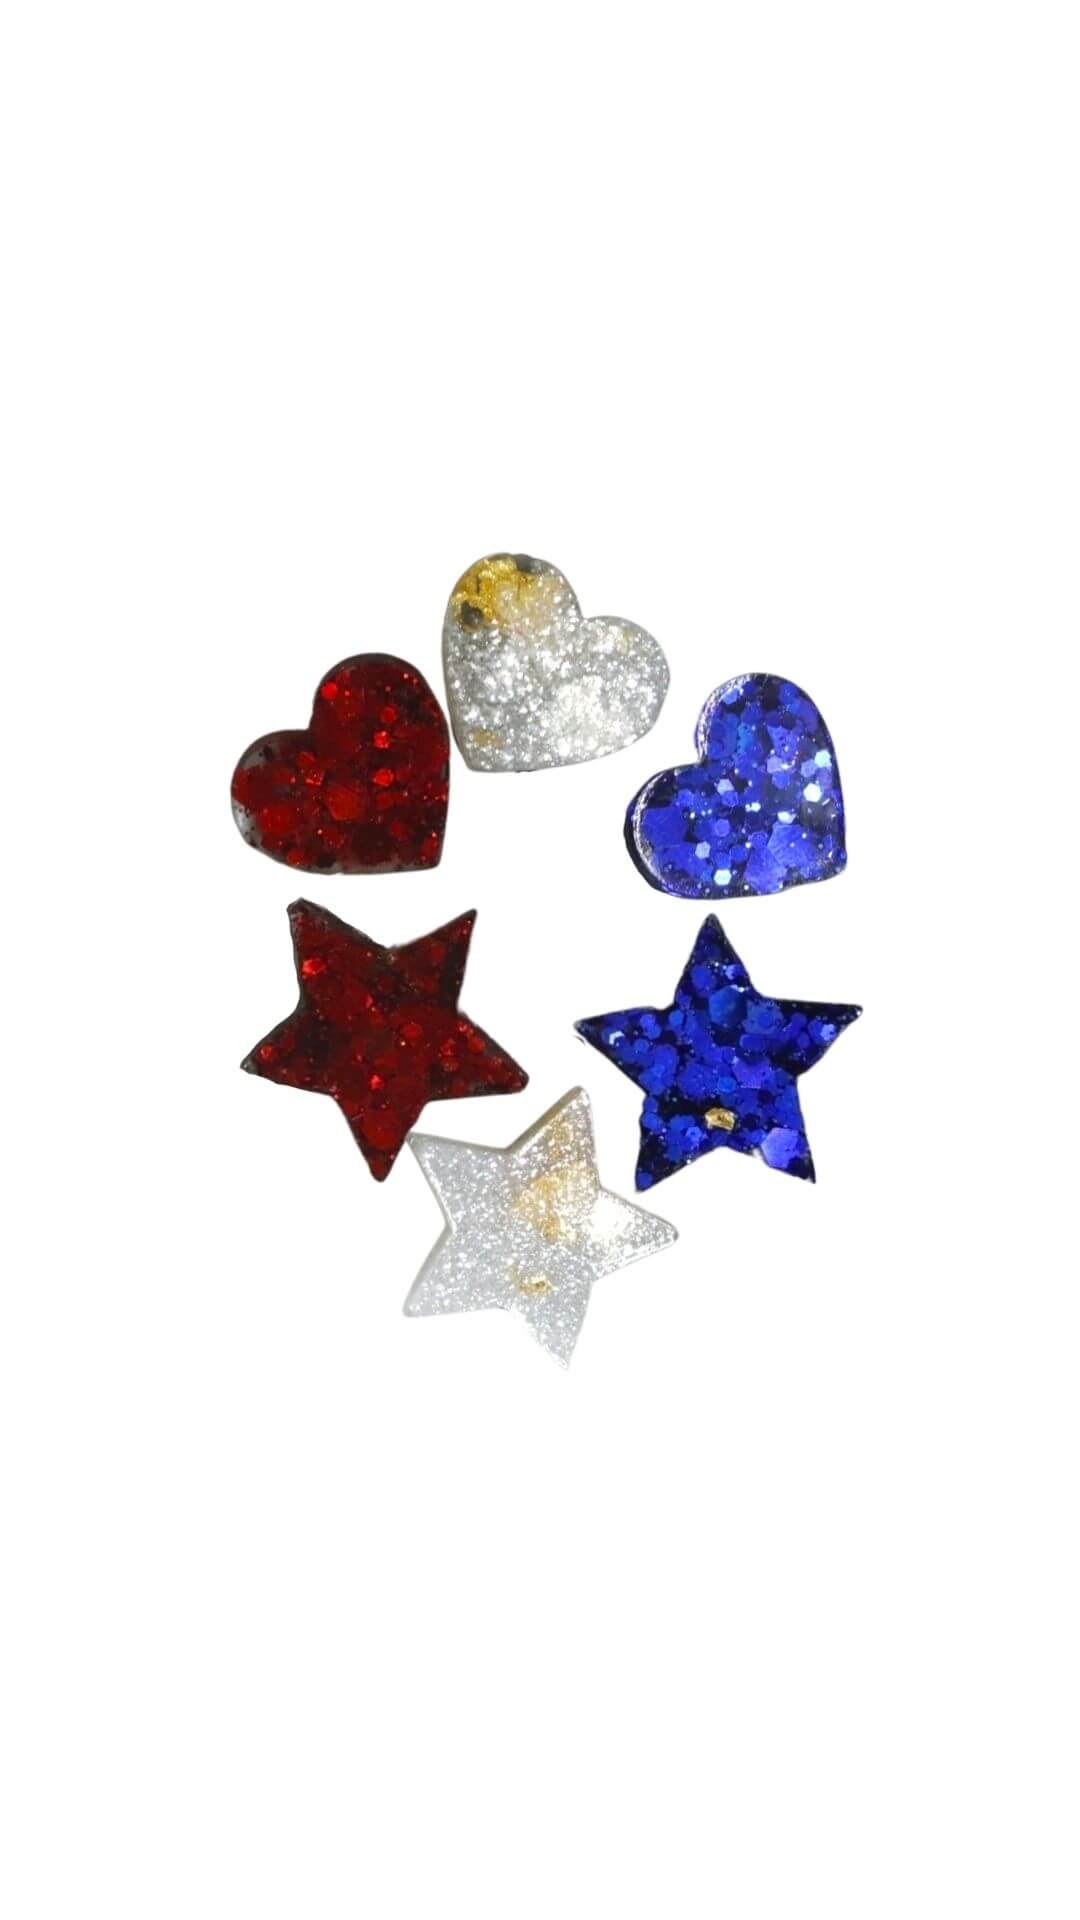 patriotic-stud-earrings---heart-star-studs---red-white-and-blue-glittery-earrings---kaleidoscopes-and-polka-dots